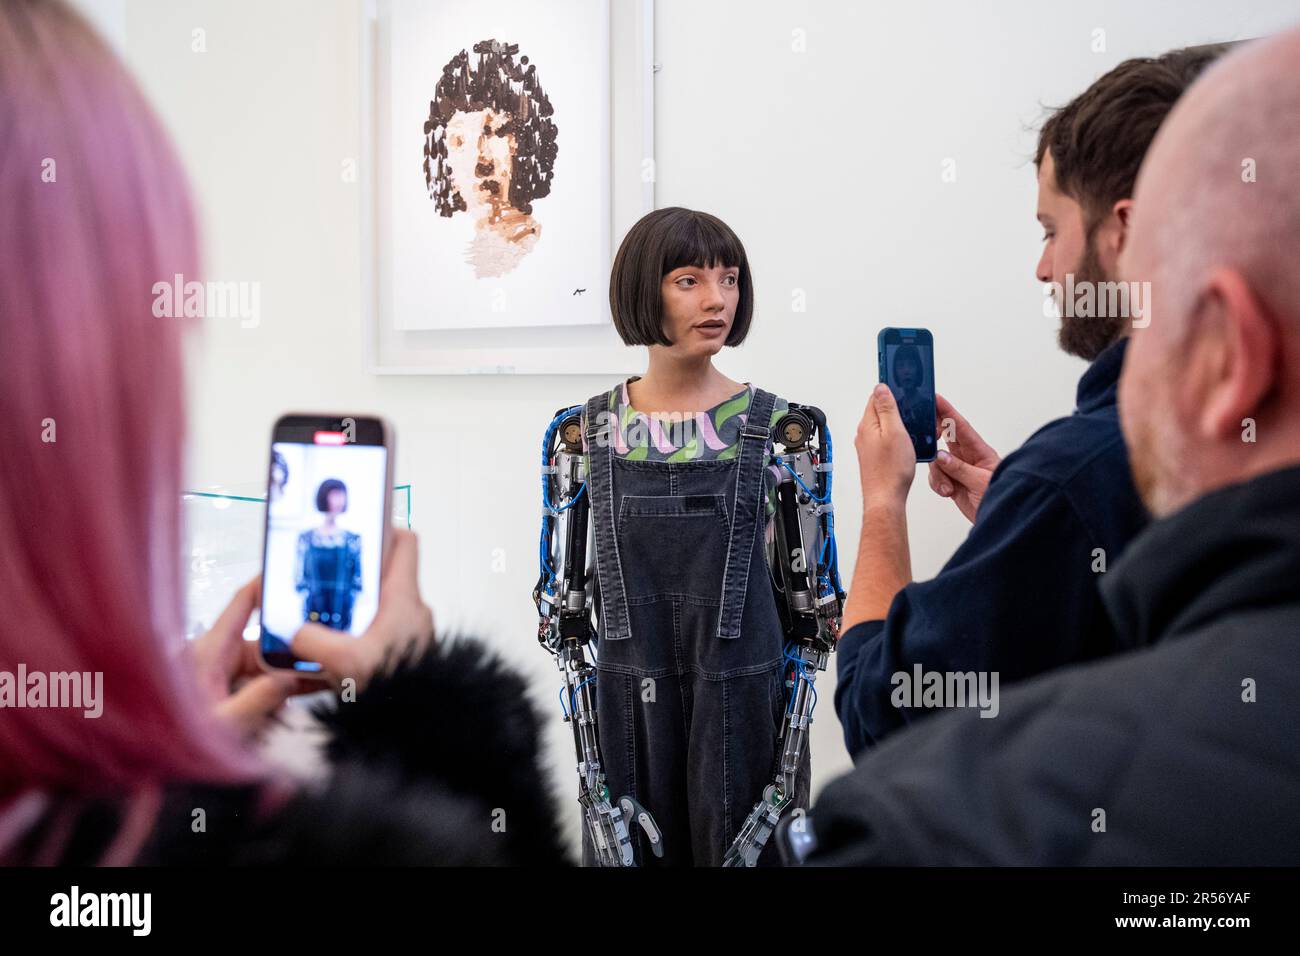 London, UK.  1 June 2023. Visitors interact with Ai-Da robot, the world’s first humanoid robot artist, on the opening day of London Design Biennale 2023 at Somerset House. Using artificial intelligence (AI), she will be designing objects during the festival.  Over 40 international design exhibitors are presenting installations showcasing designs that confront global challenges across a variety of mediums.  The show runs 1 to 25 June.  Credit: Stephen Chung / Alamy Live News Stock Photo